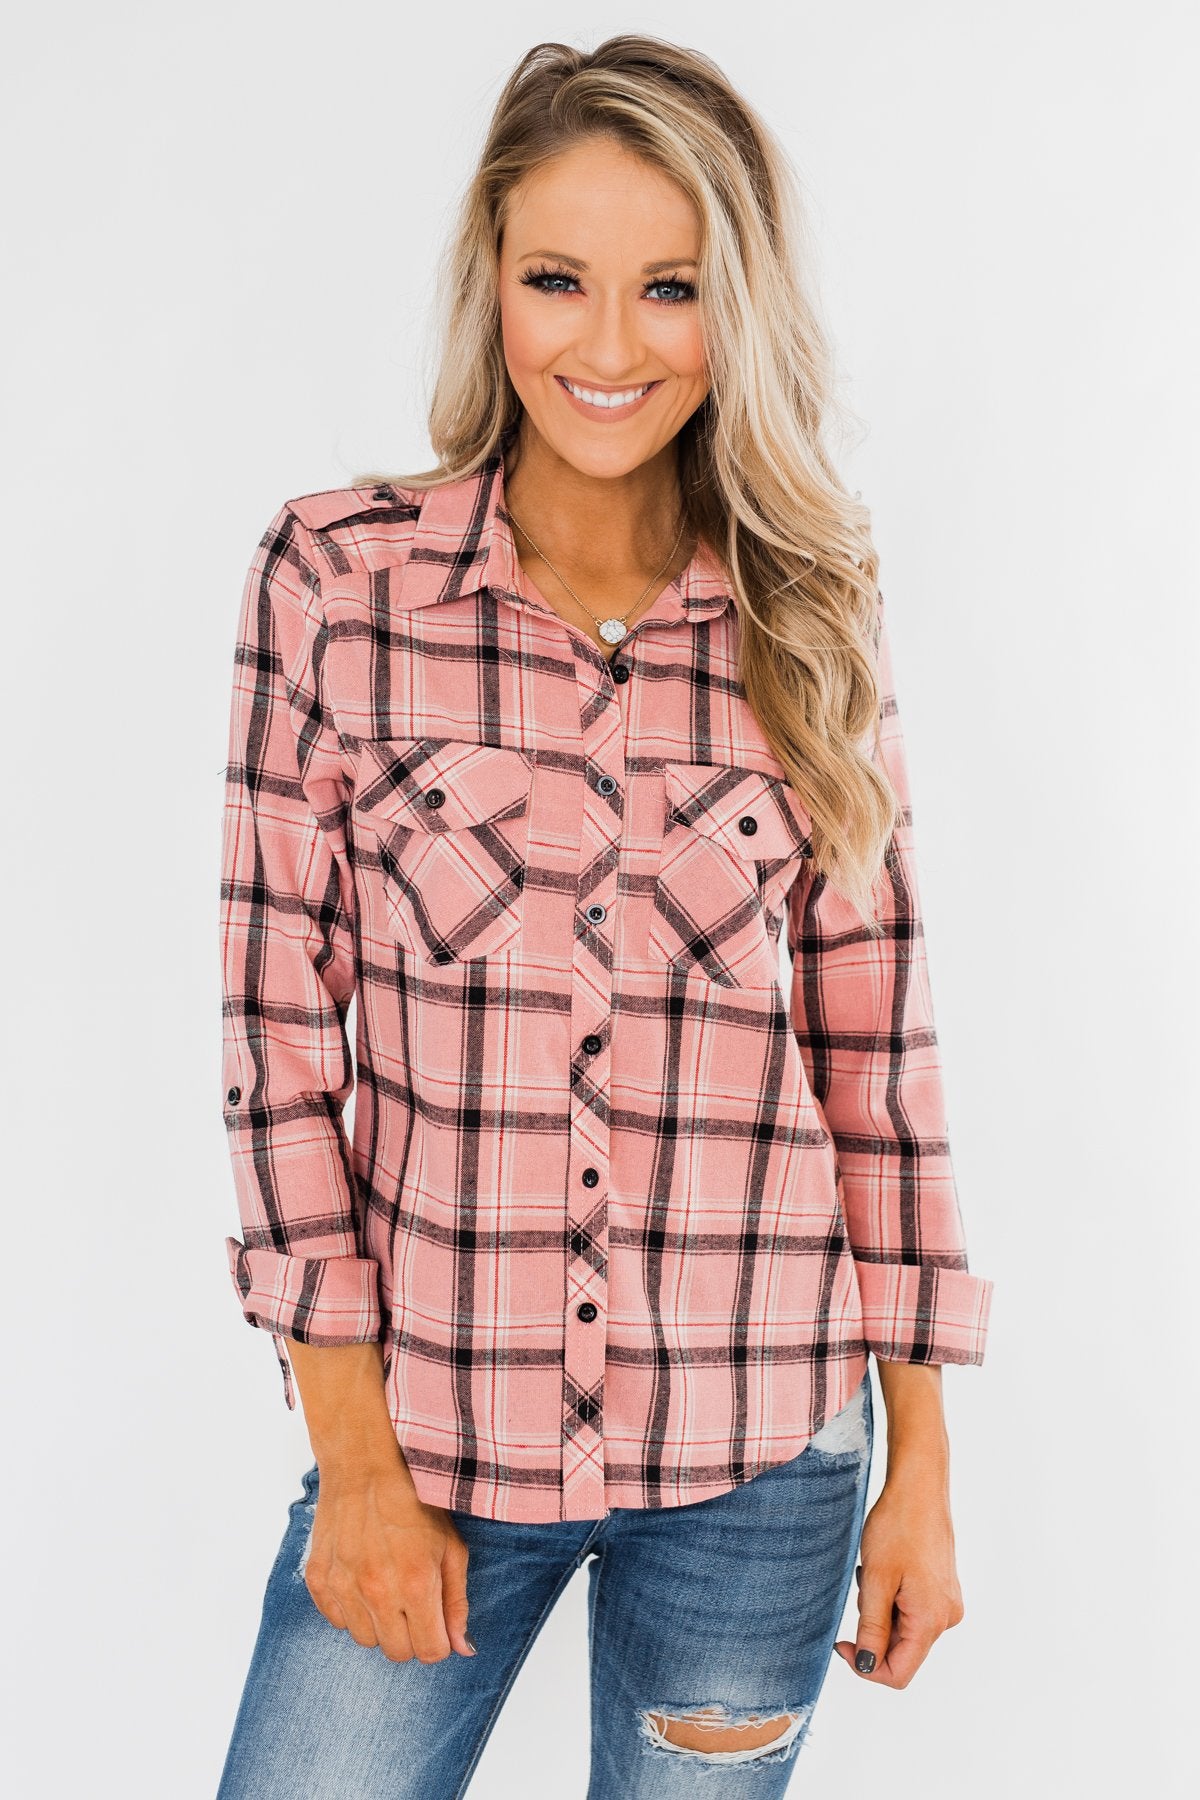 I've Been Told Long Sleeve Plaid Top- Light Pink